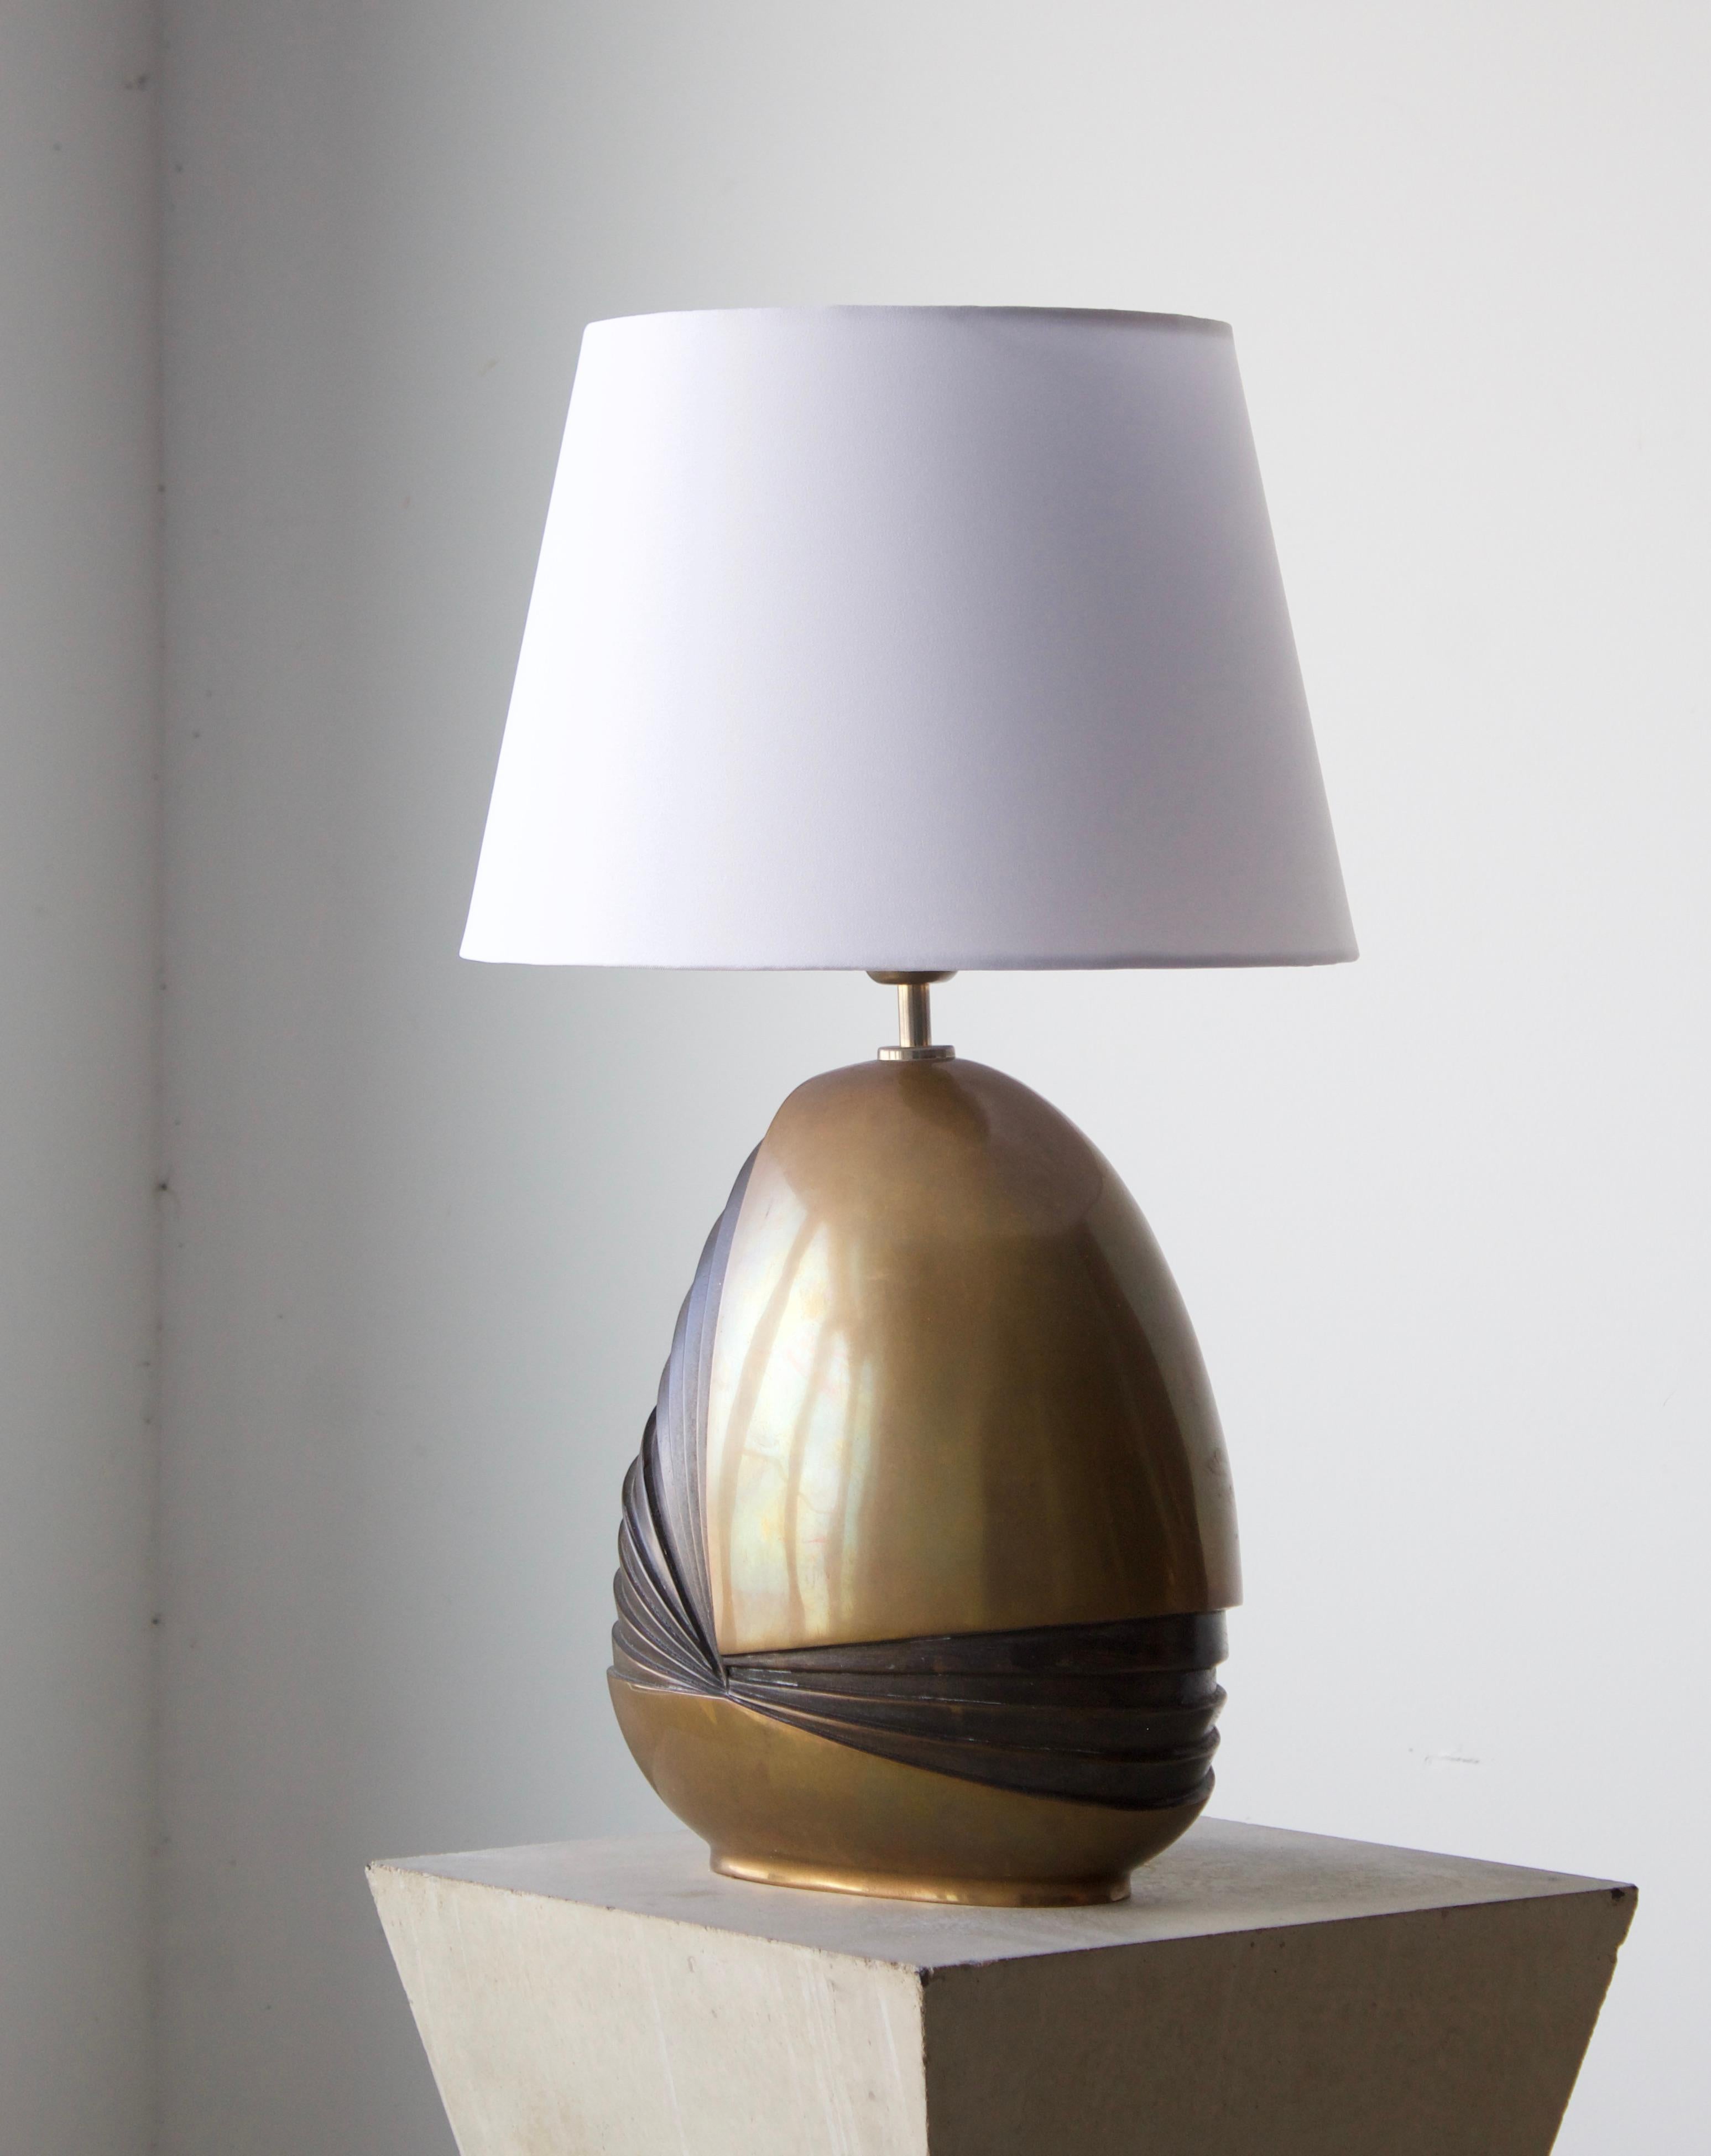 A sizable sculptural table lamp, designed and produced in Italy, 1970s. In brass. Features polished brass and sculptural details in contrasting patinated brass.

Stated dimensions exclude lampshade, height includes socket. Sold without